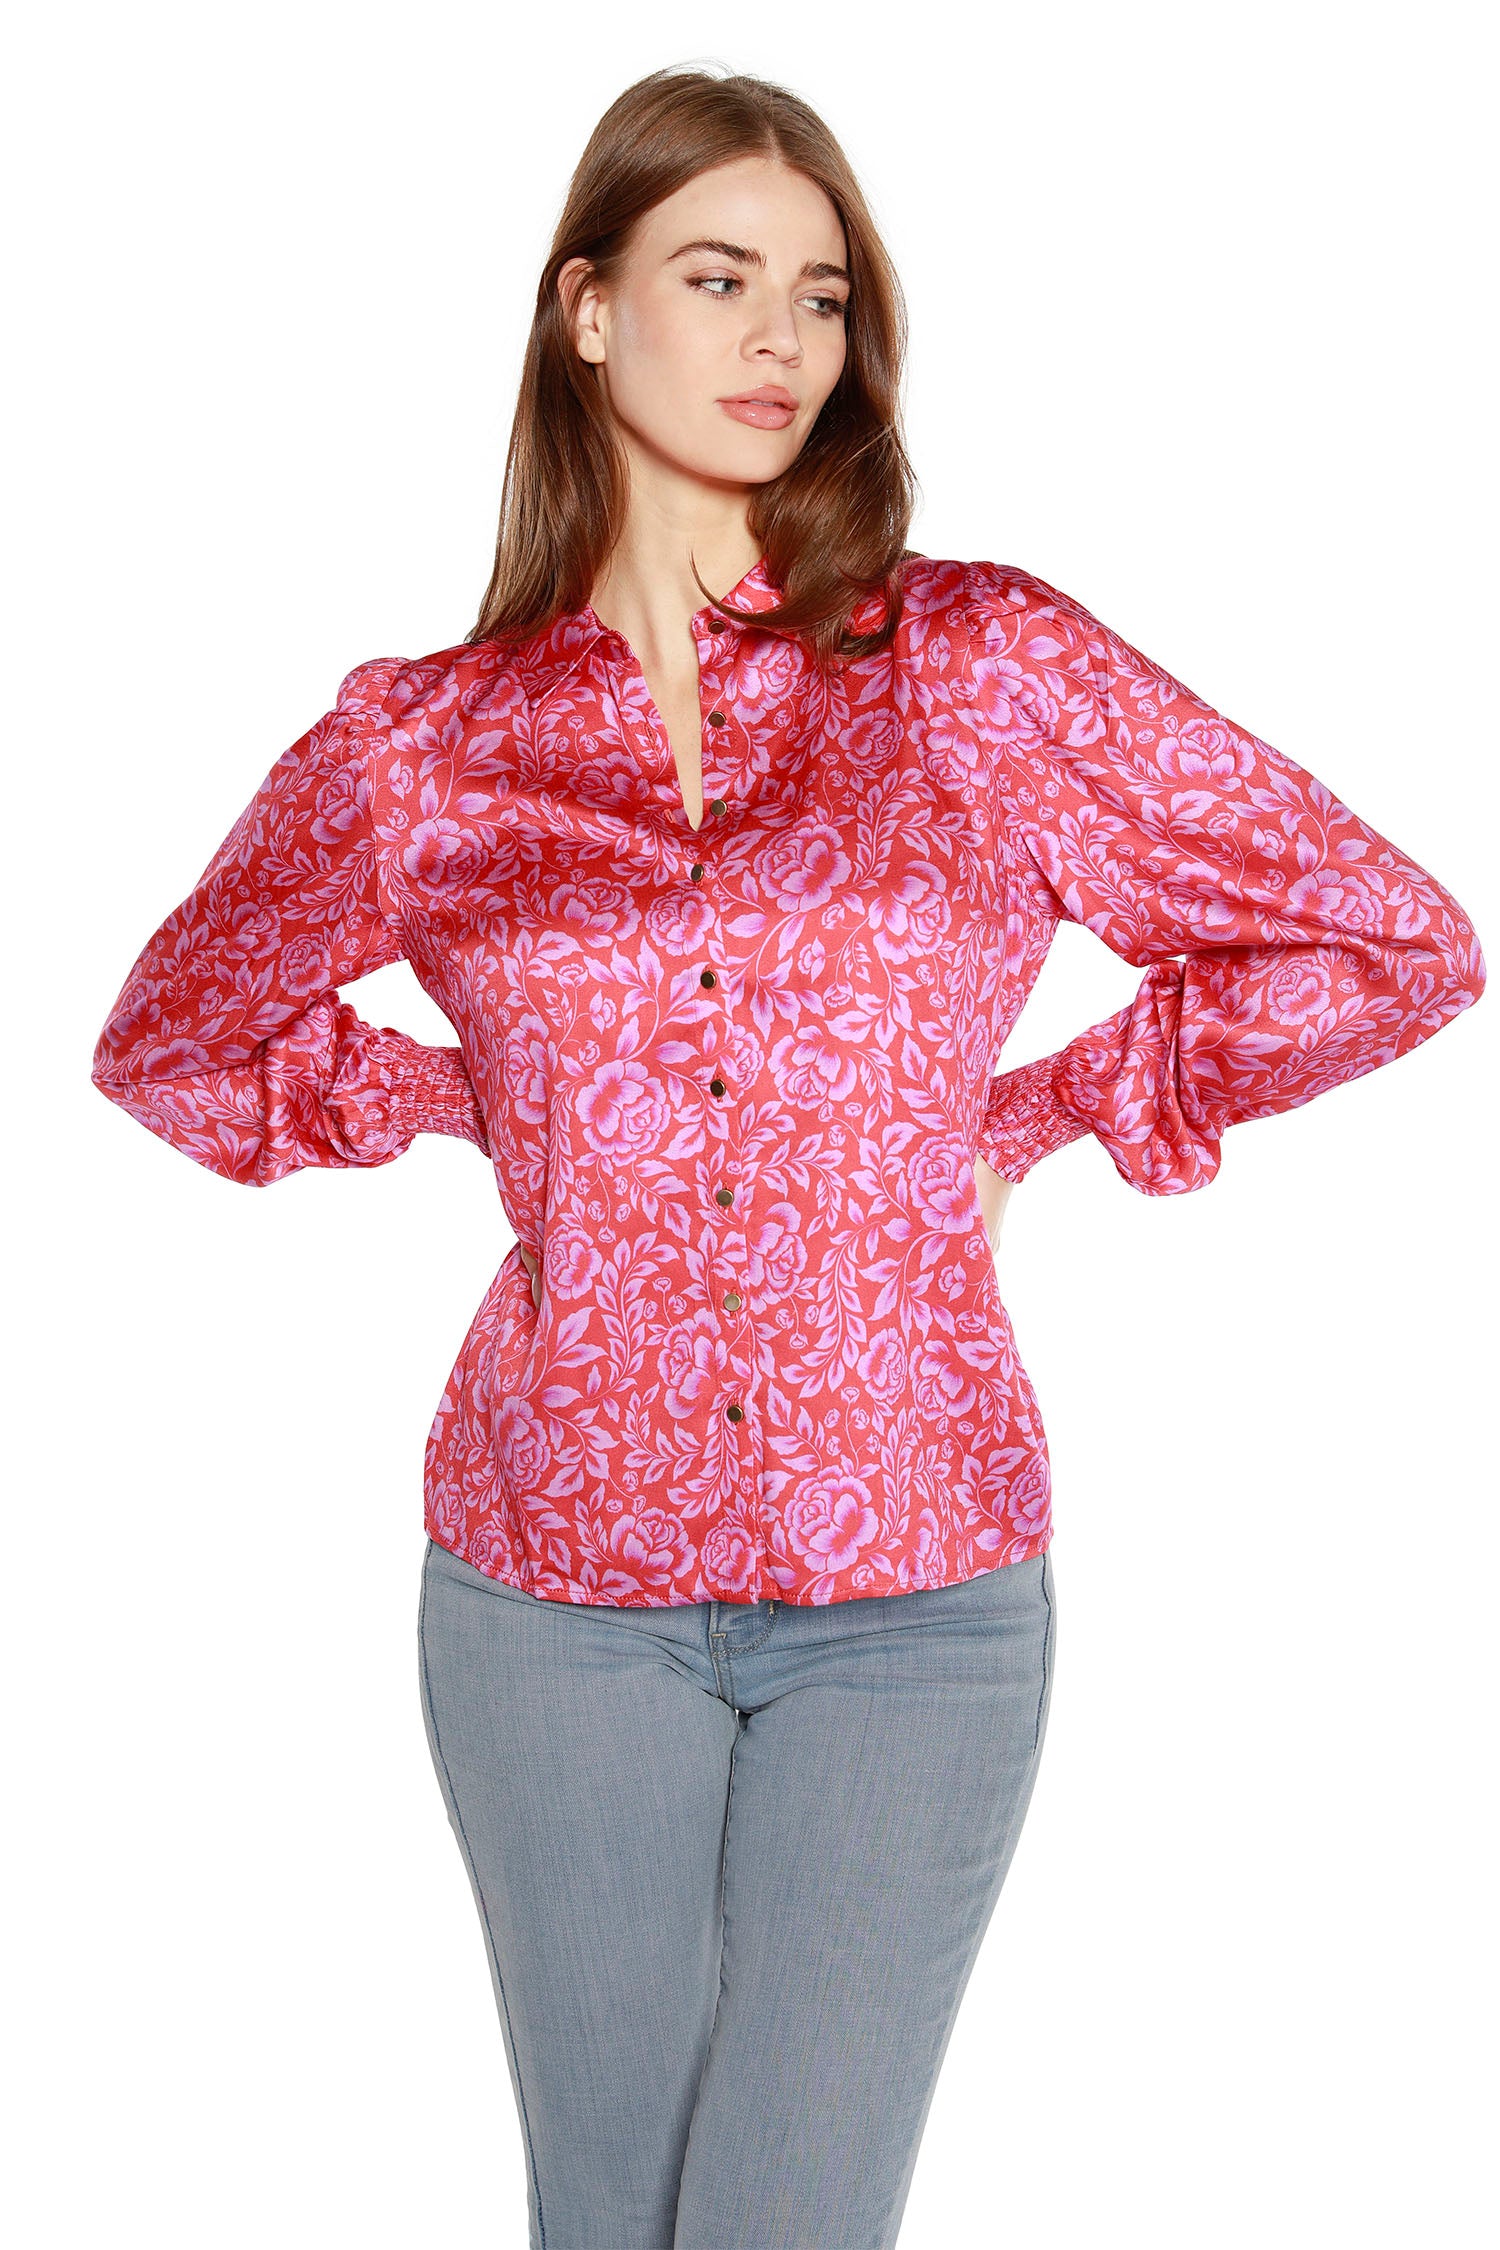 Women’s Floral Printed Button Front Shirt with Bishop Sleeves